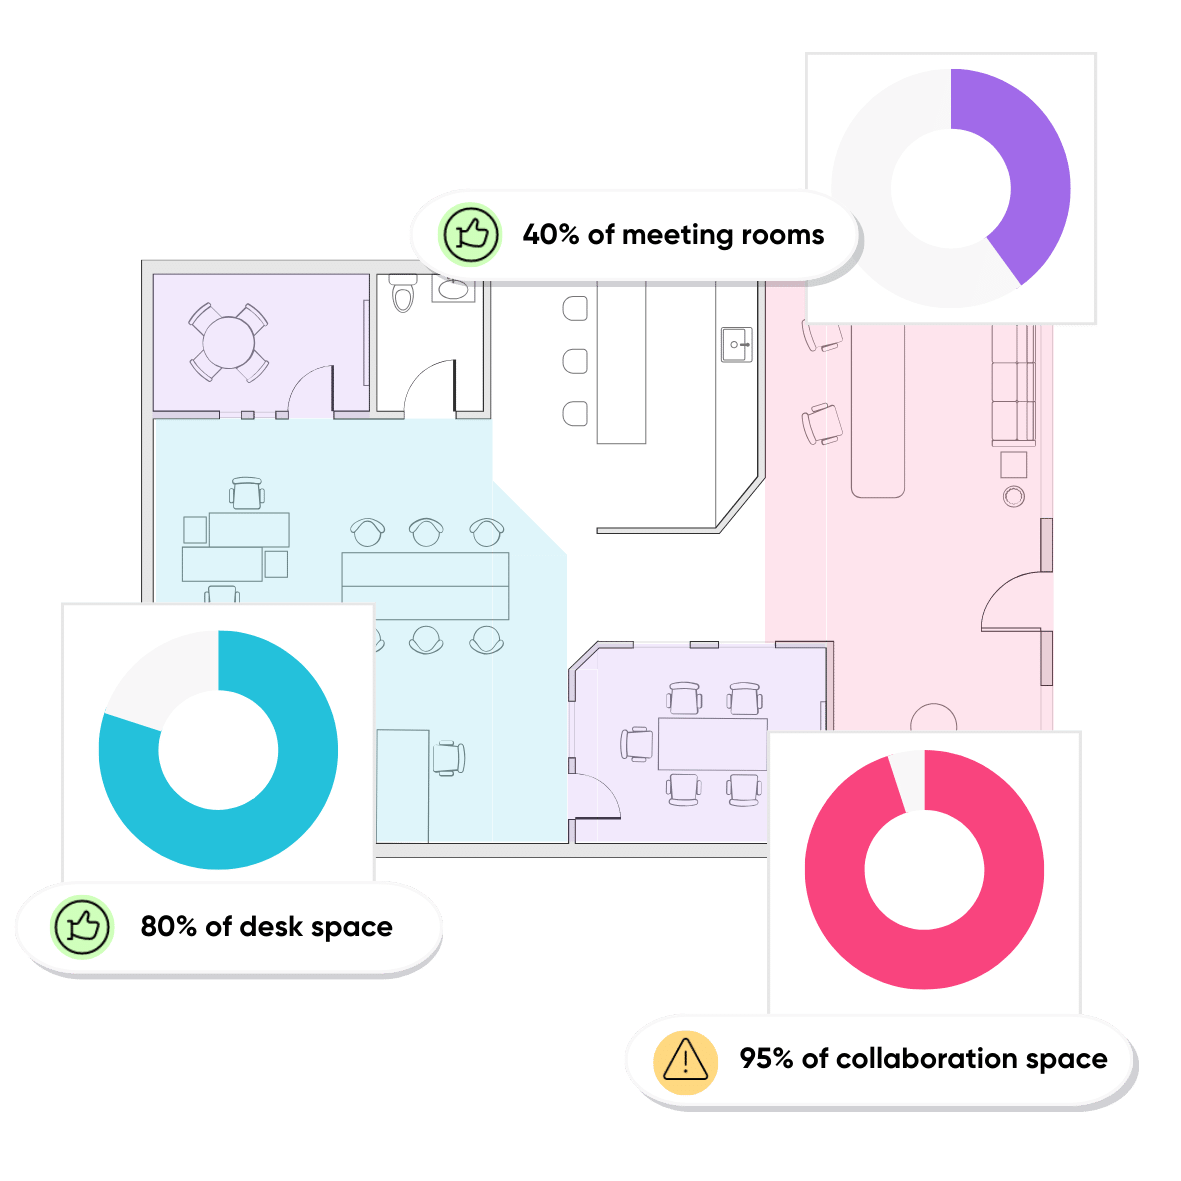 Room booking software and space management floorplan tool